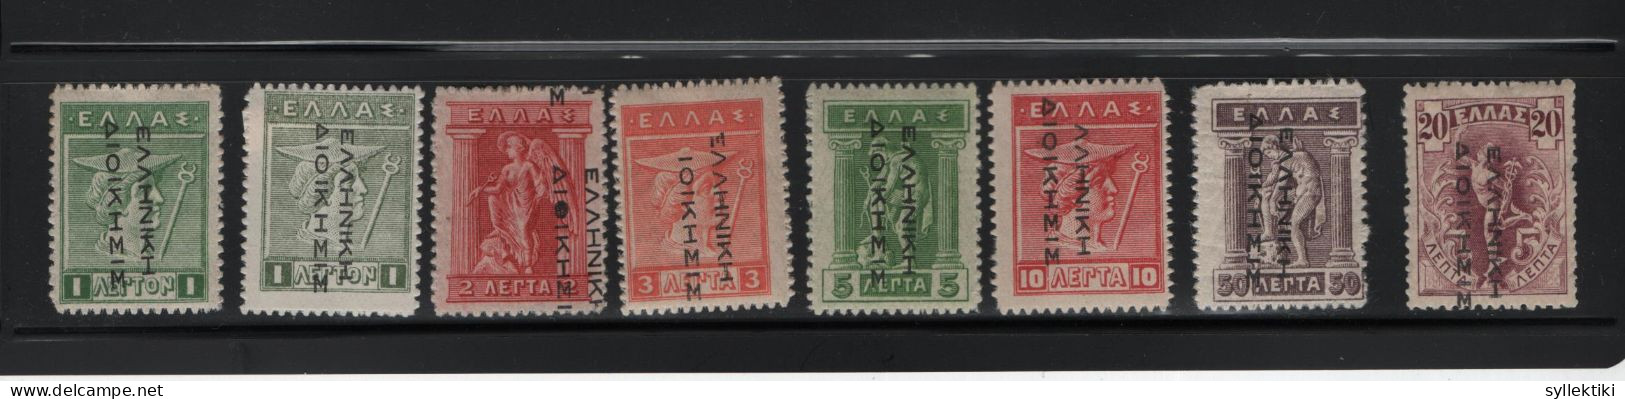 GREECE 1913 GREEK ADMIN READING DOWN 1 LEPTON - 20 LEPTA 8 DIFFERENT MH STAMPS  HELLAS No 251 - 255, 258 - 260 AND VALU - Nuevos